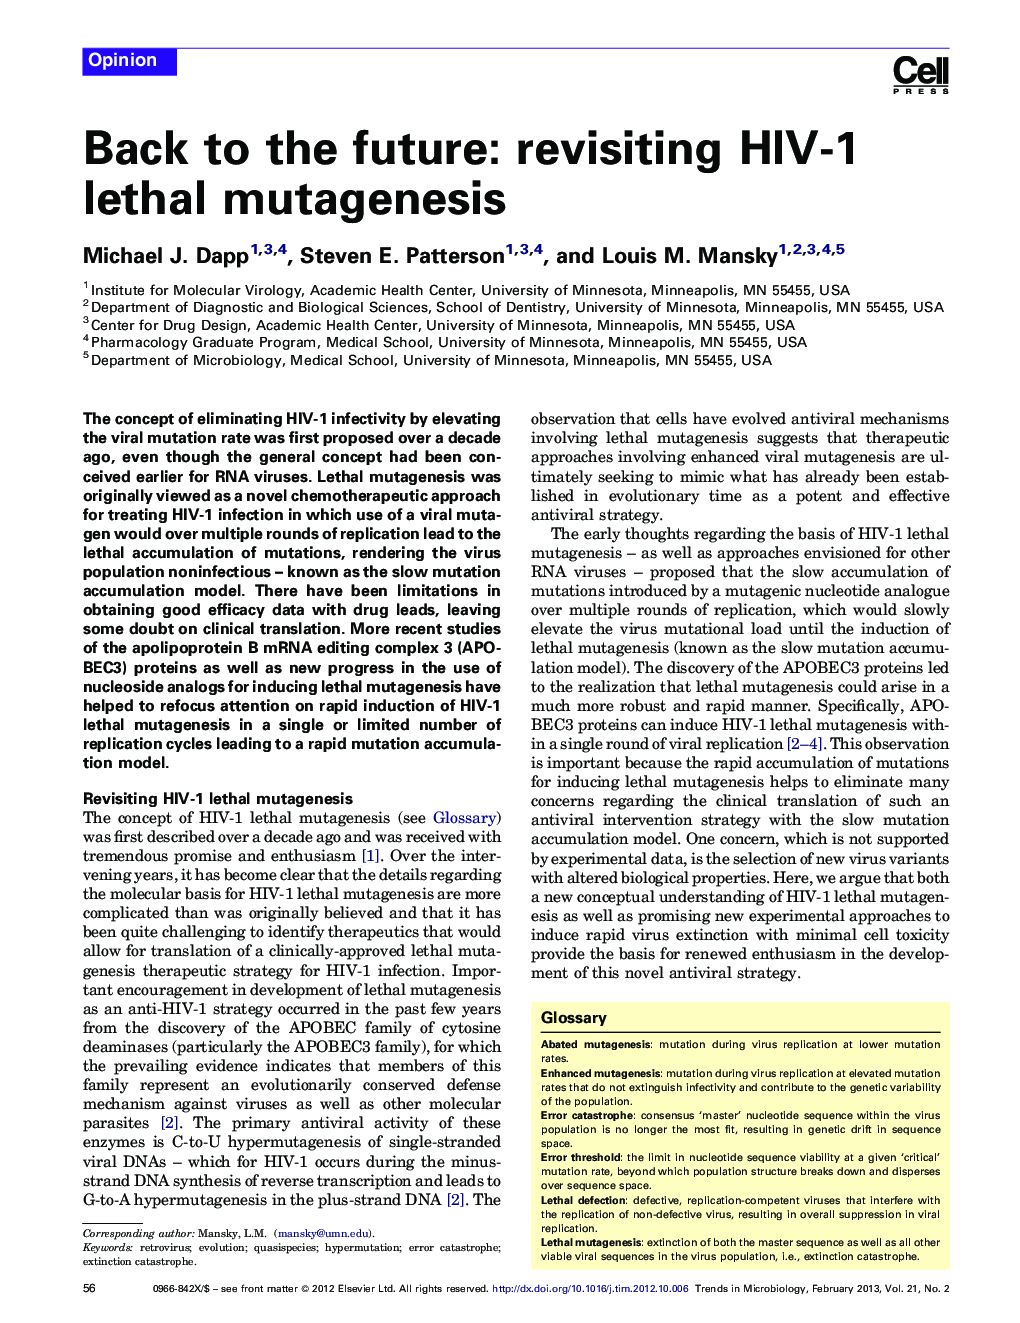 Back to the future: revisiting HIV-1 lethal mutagenesis